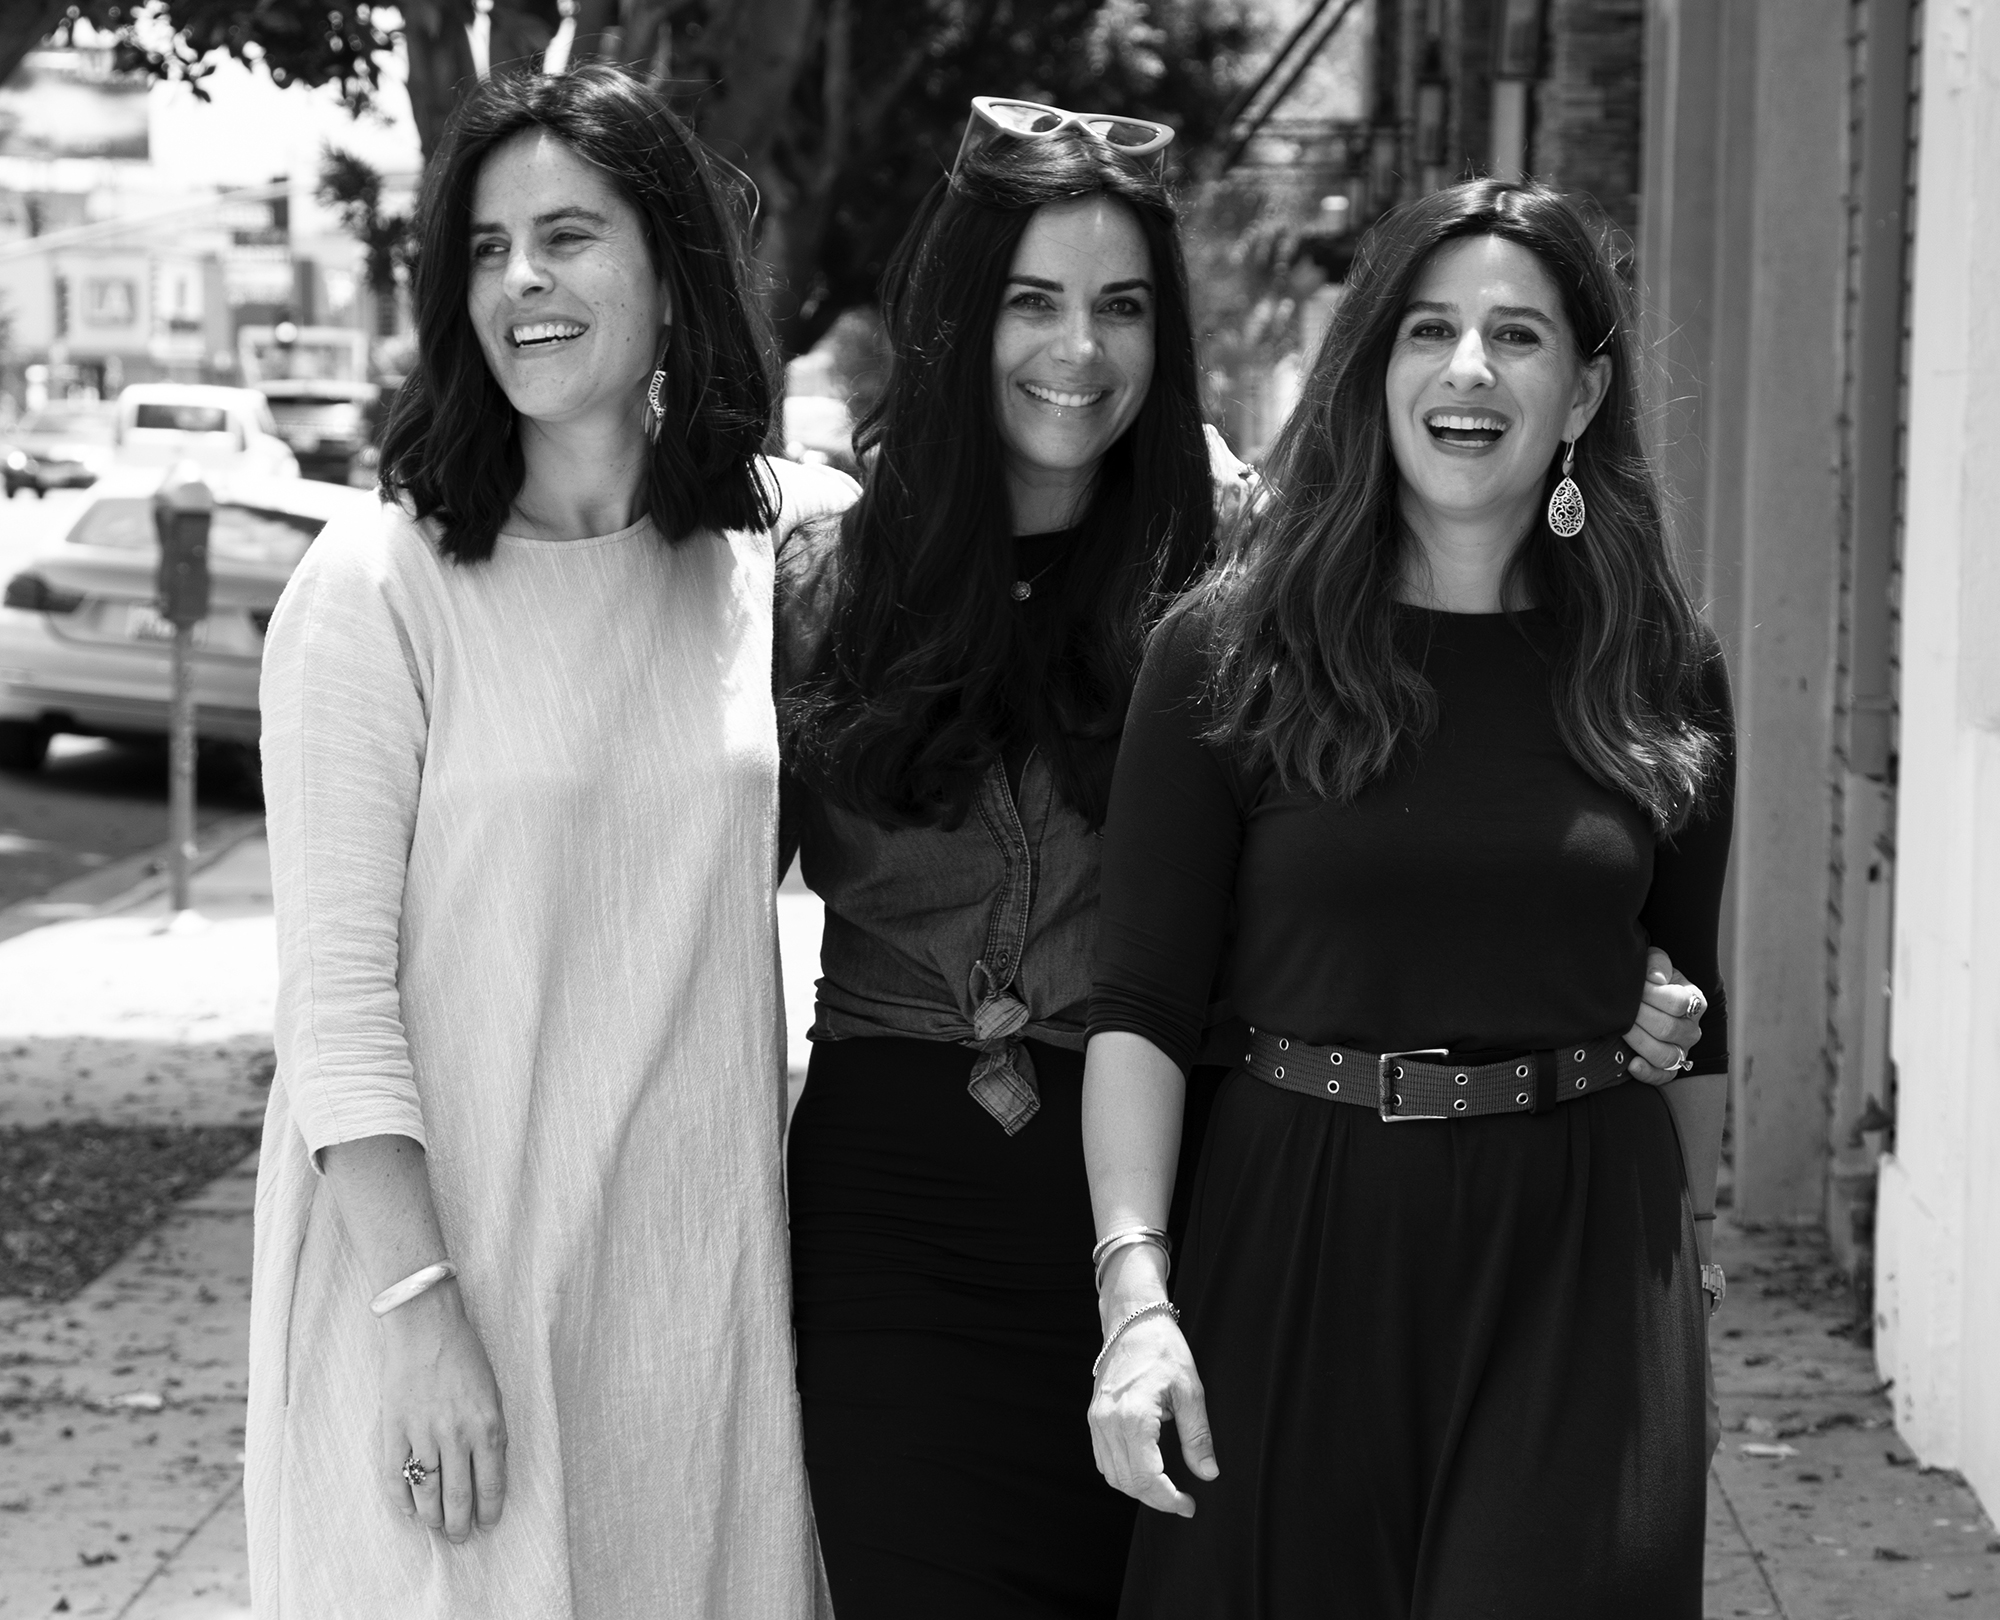 LCW alum Elaina Kornfield launched a fashion line with her sisters.